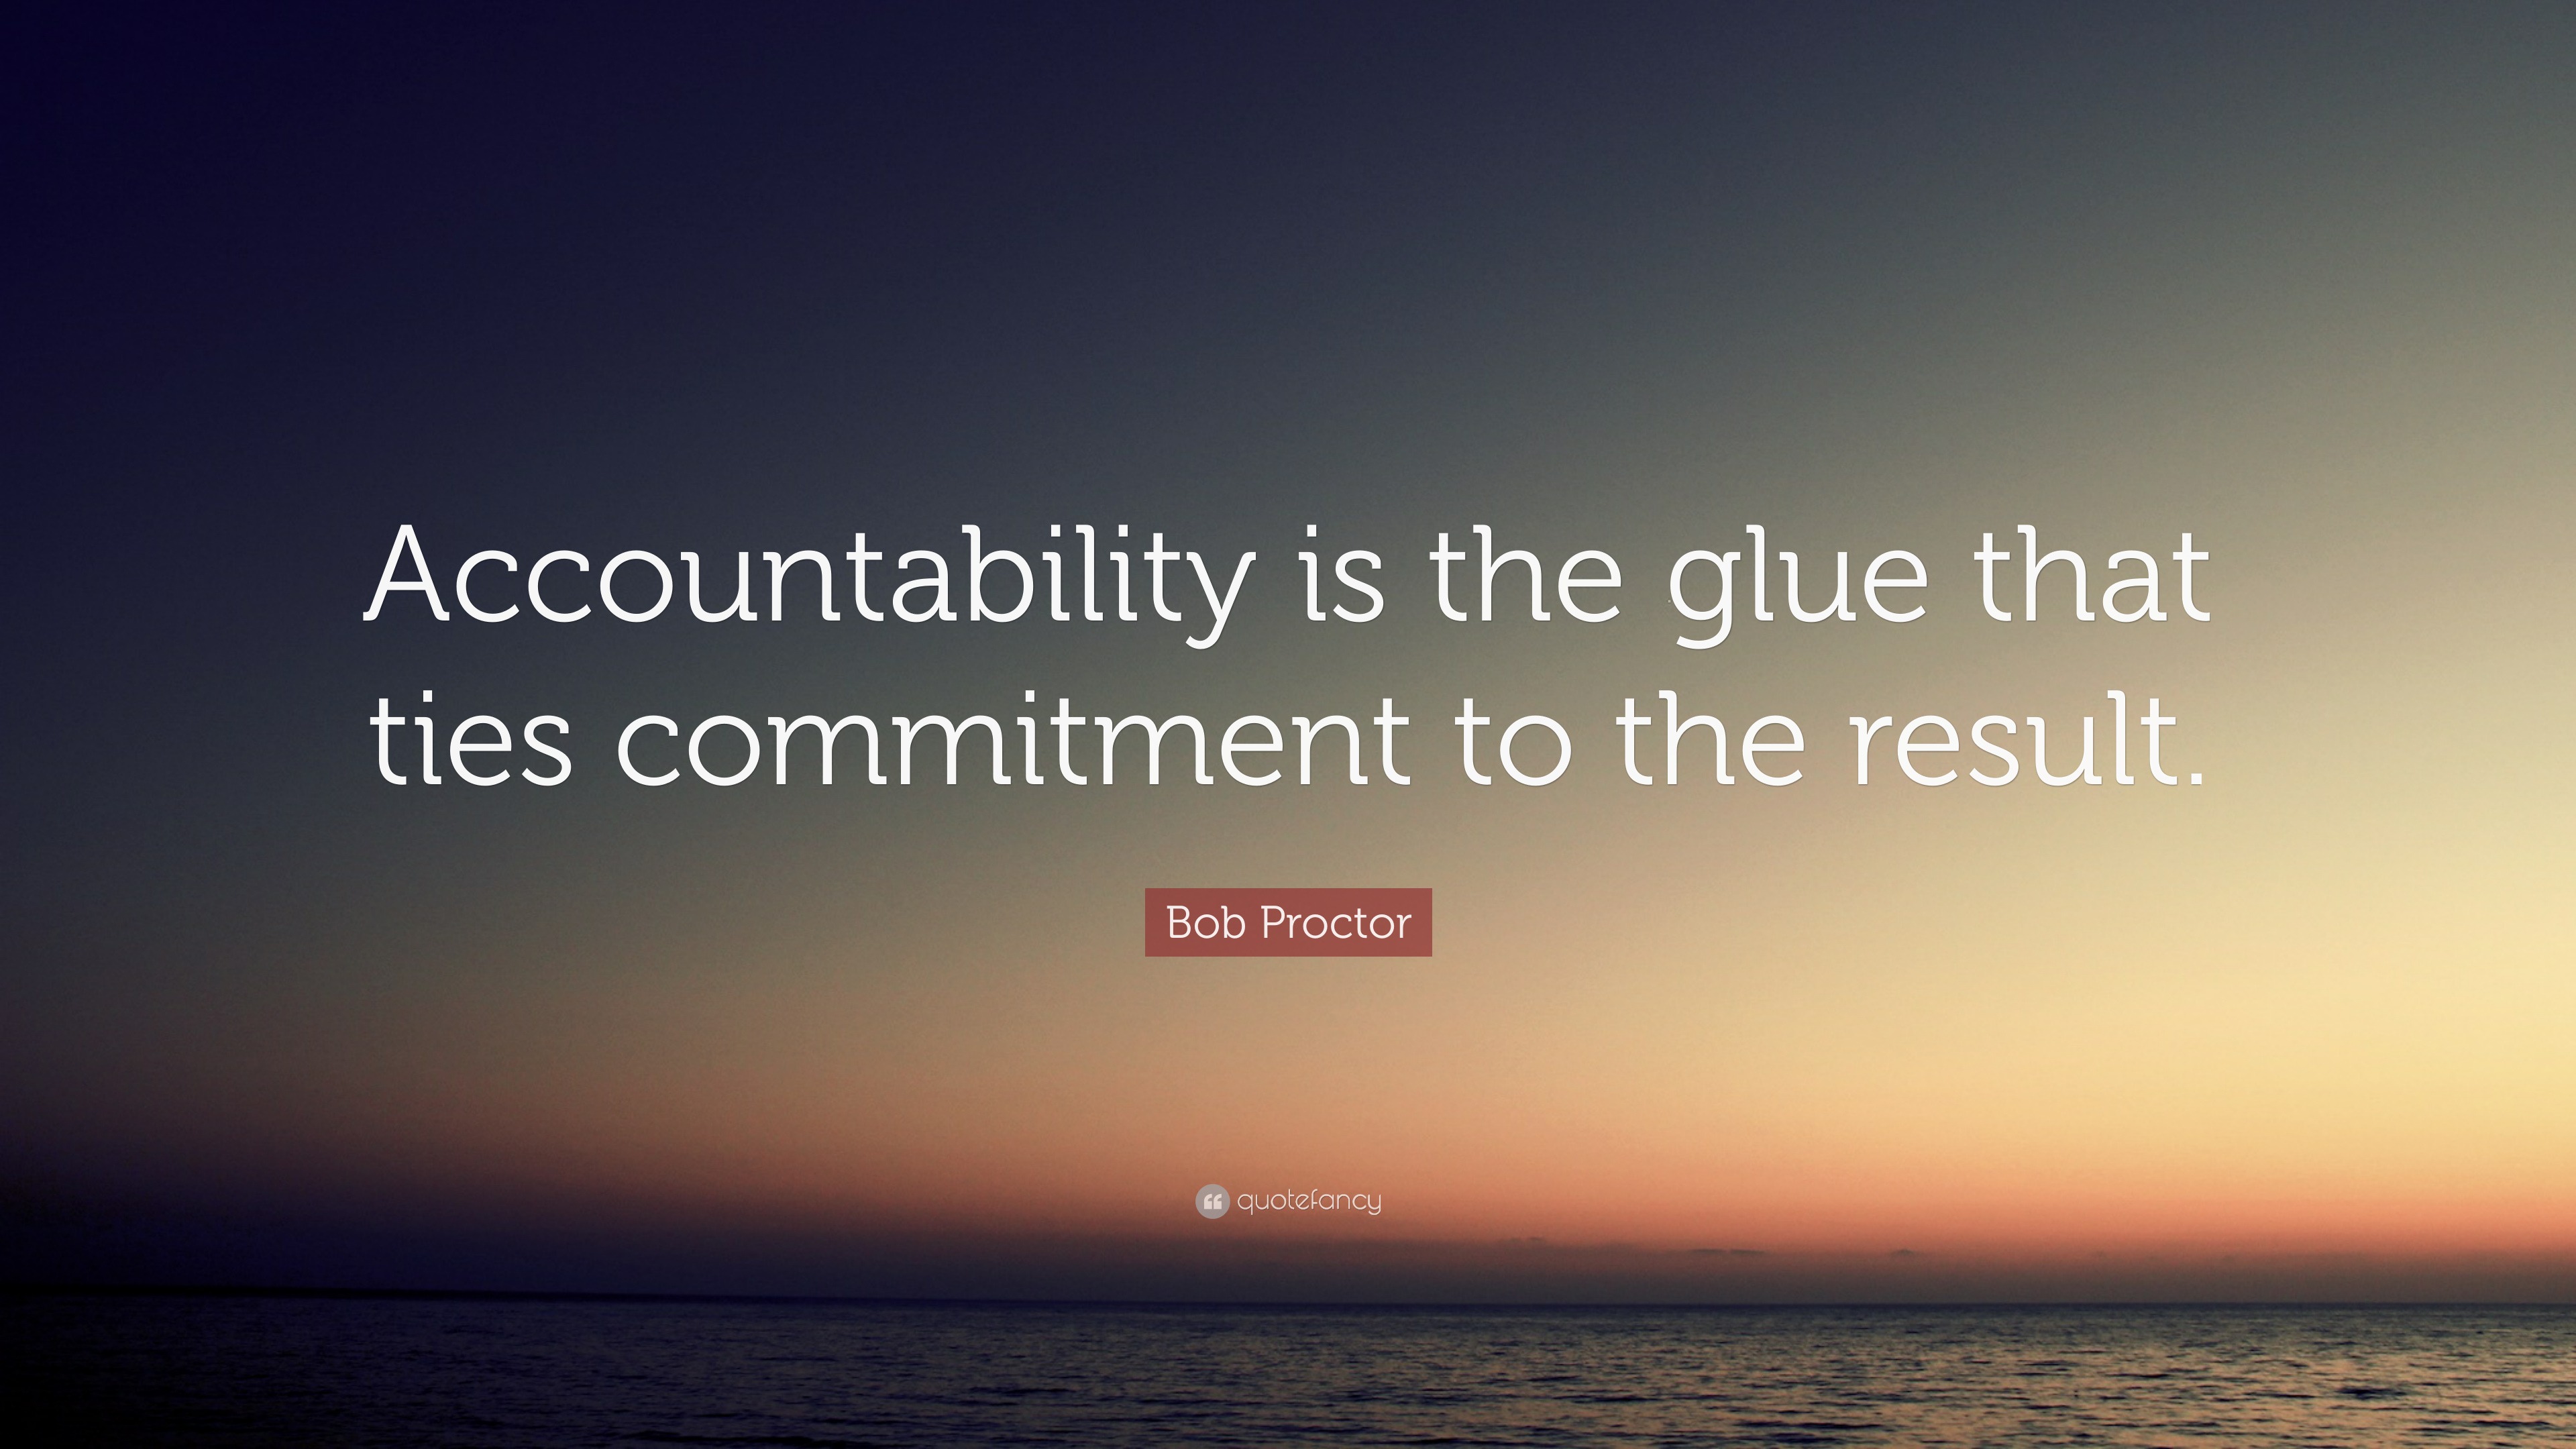 2028394 Bob Proctor Quote Accountability is the glue that ties commitment